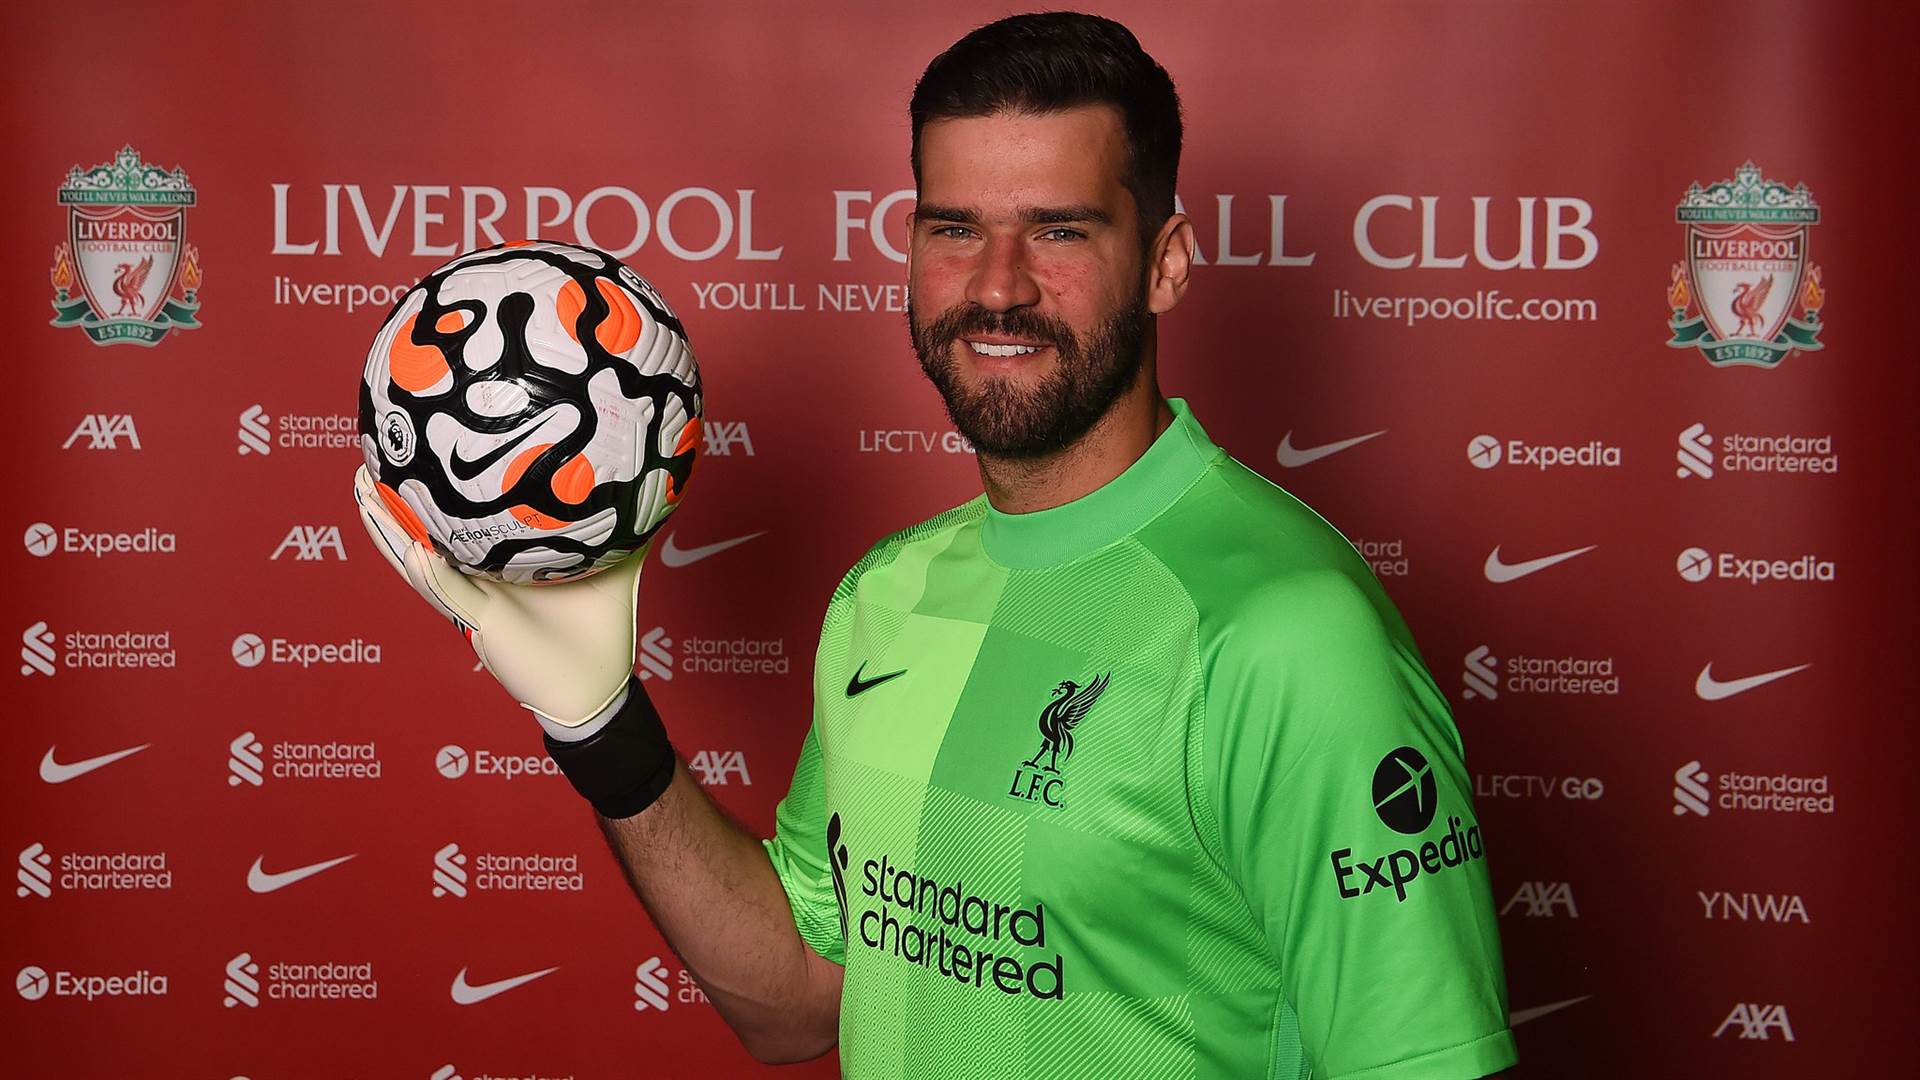 Alisson Becker (Liverpool), extended deal until 20